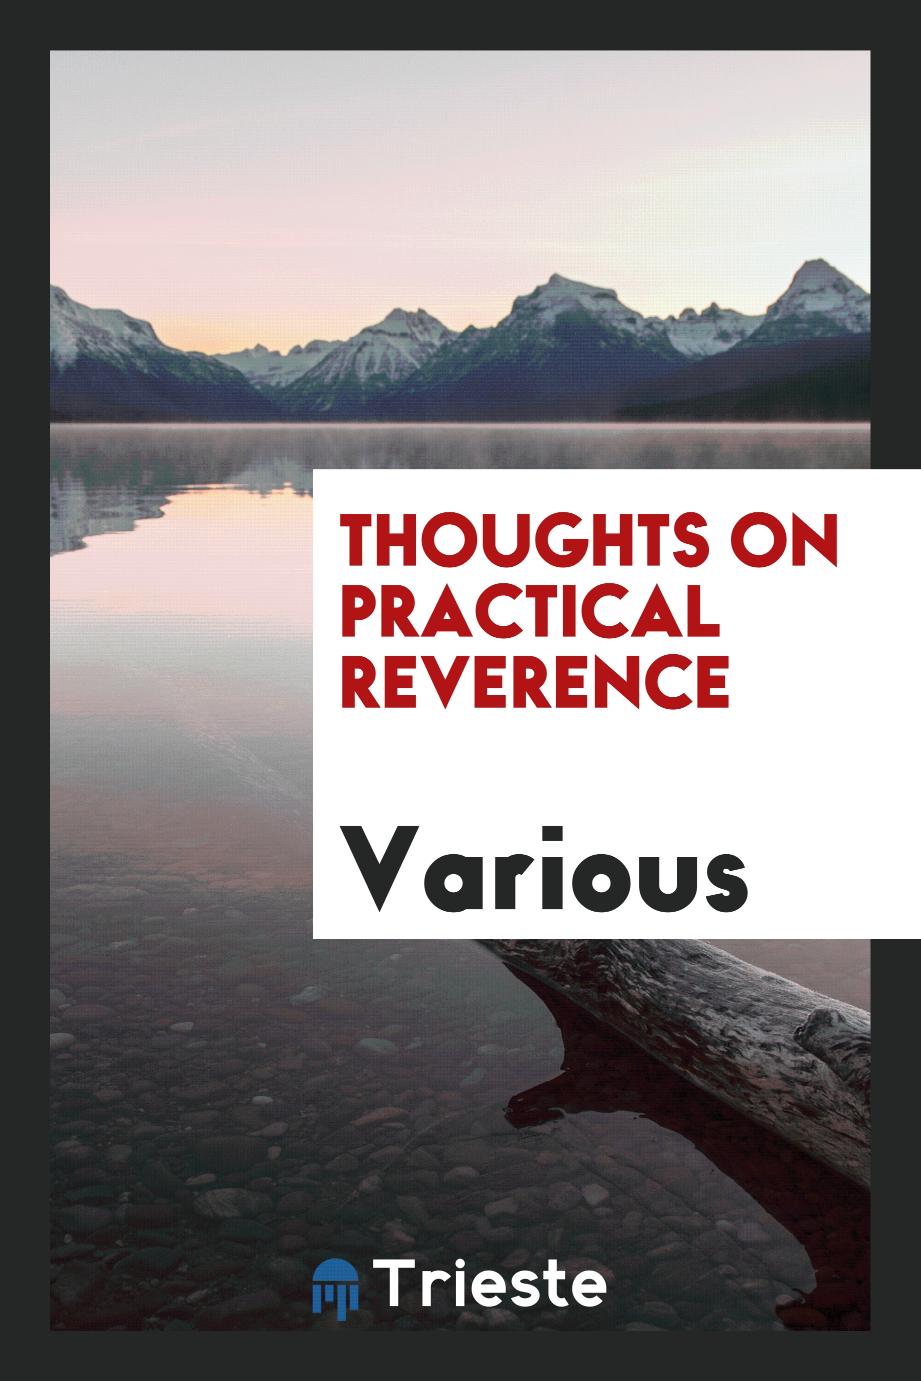 Thoughts on practical reverence